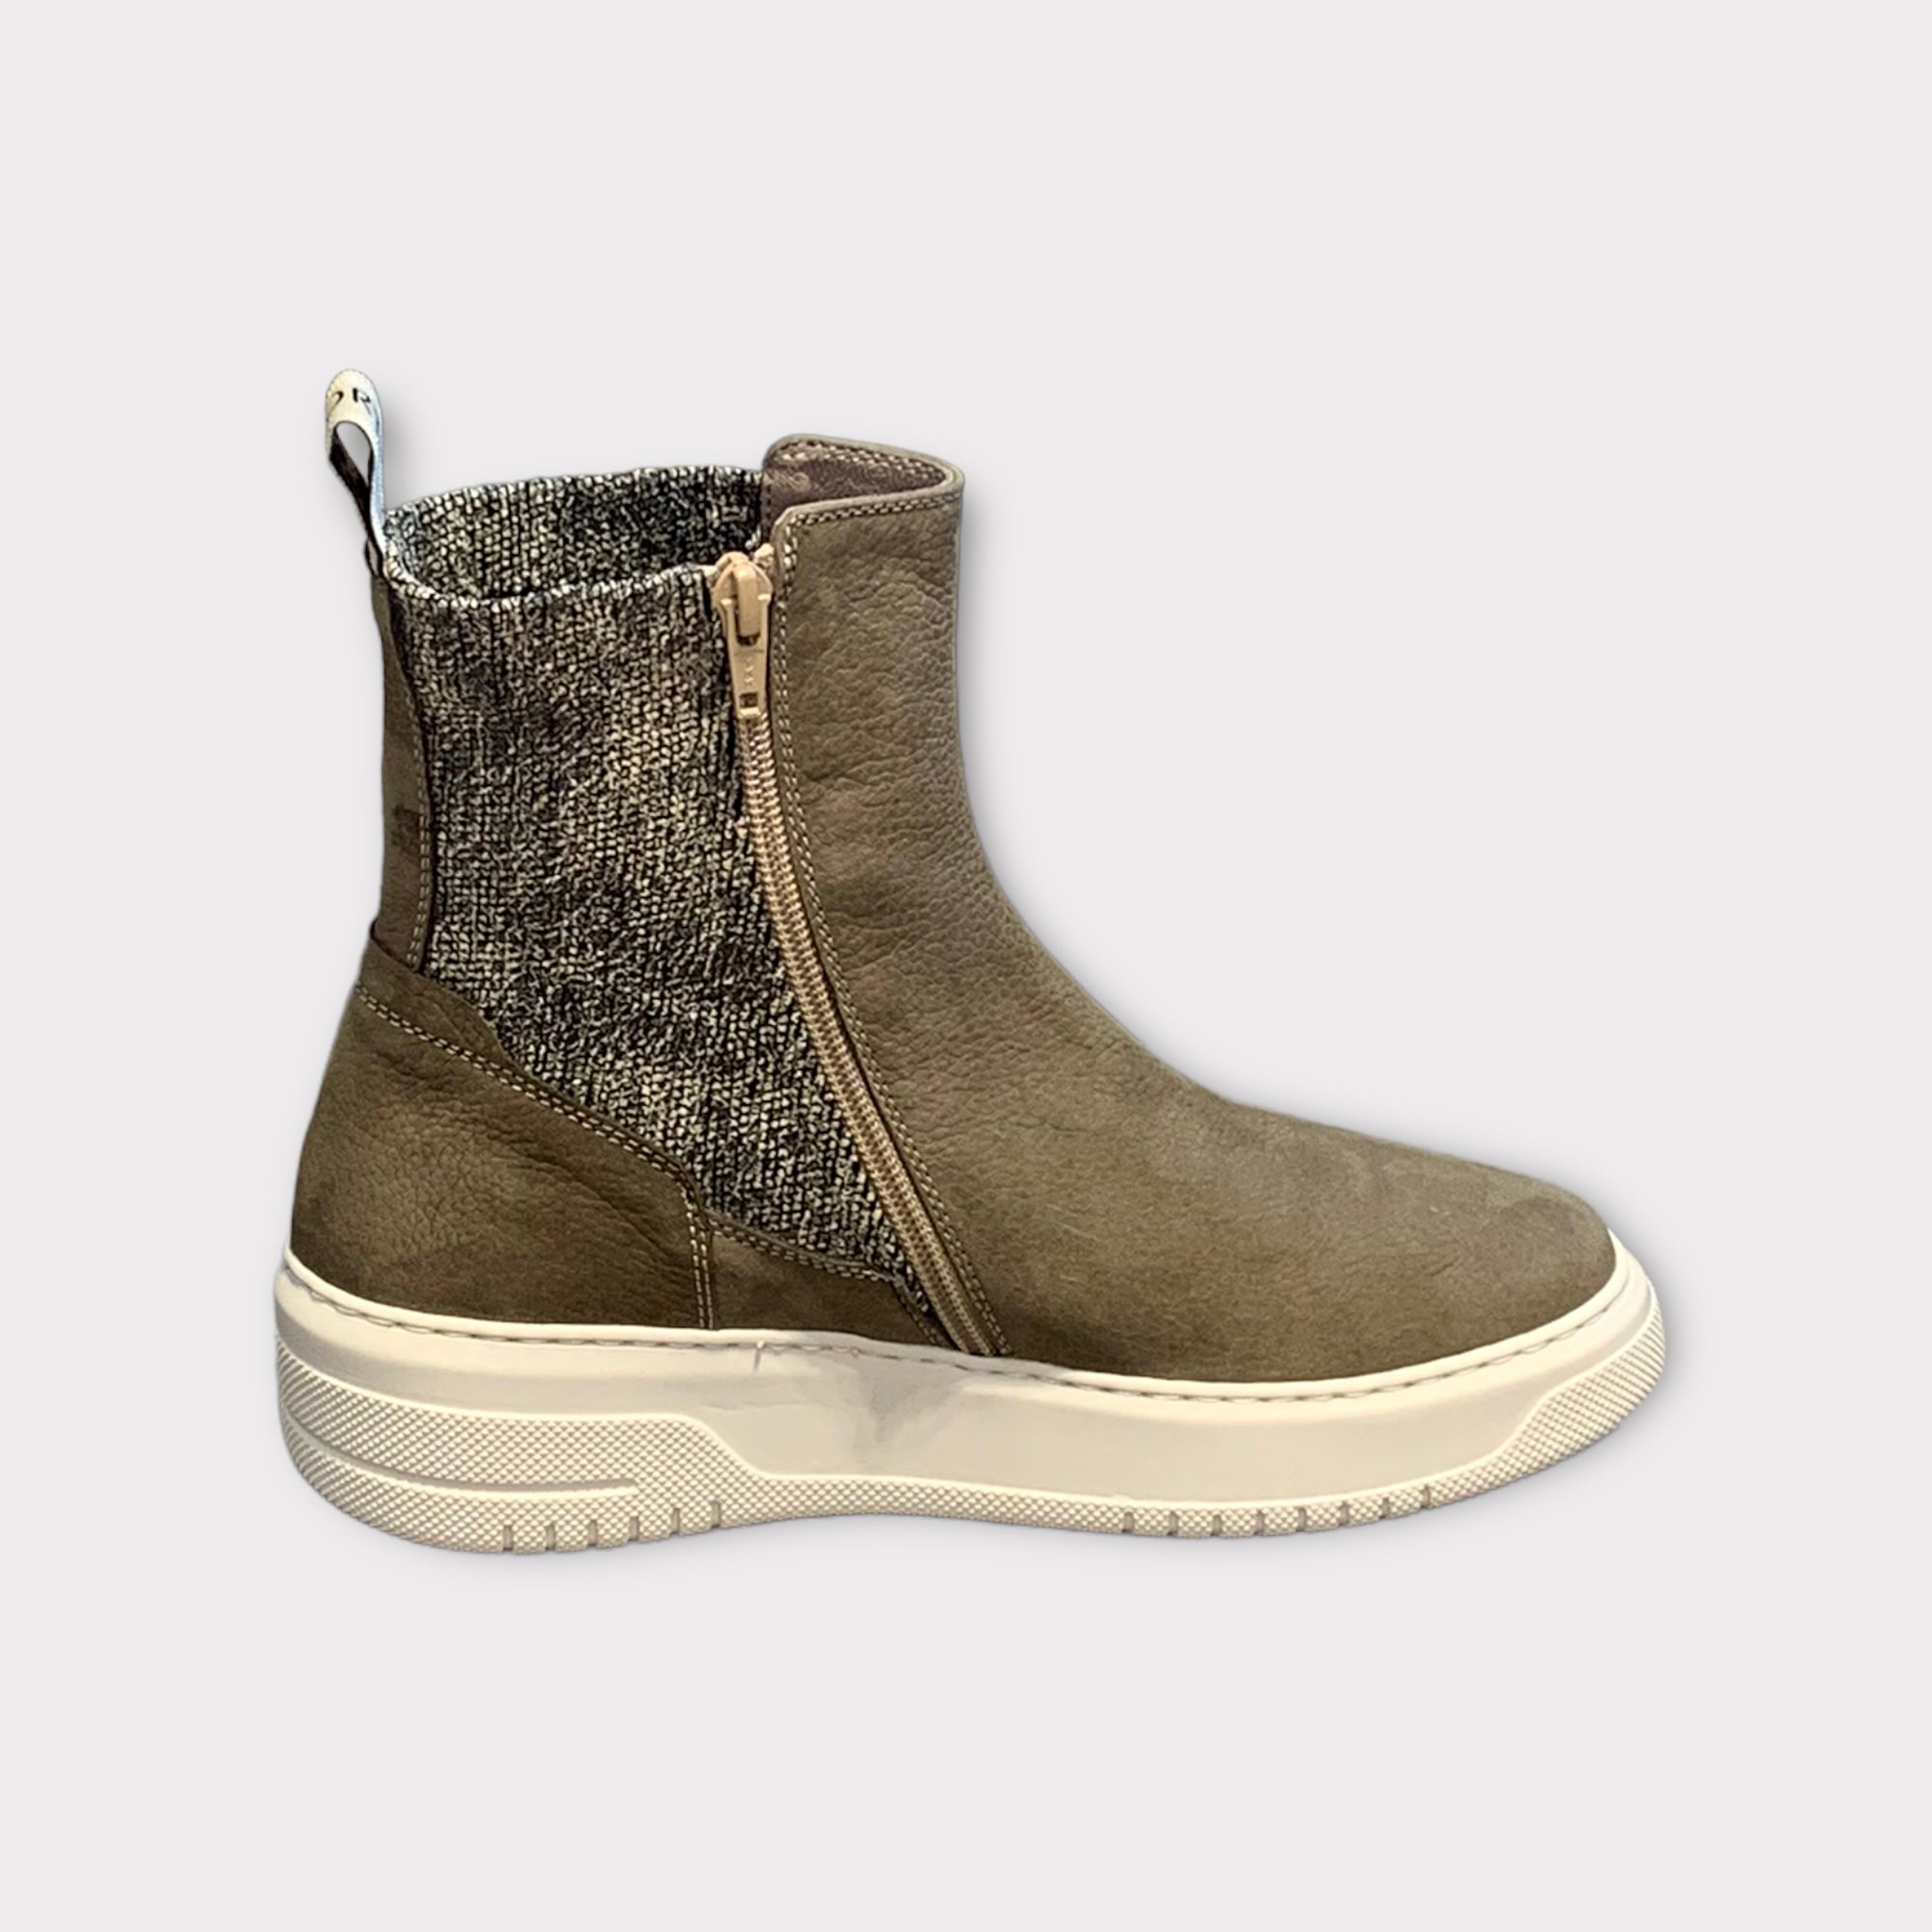 DL Sport Sporty Boots Taupe